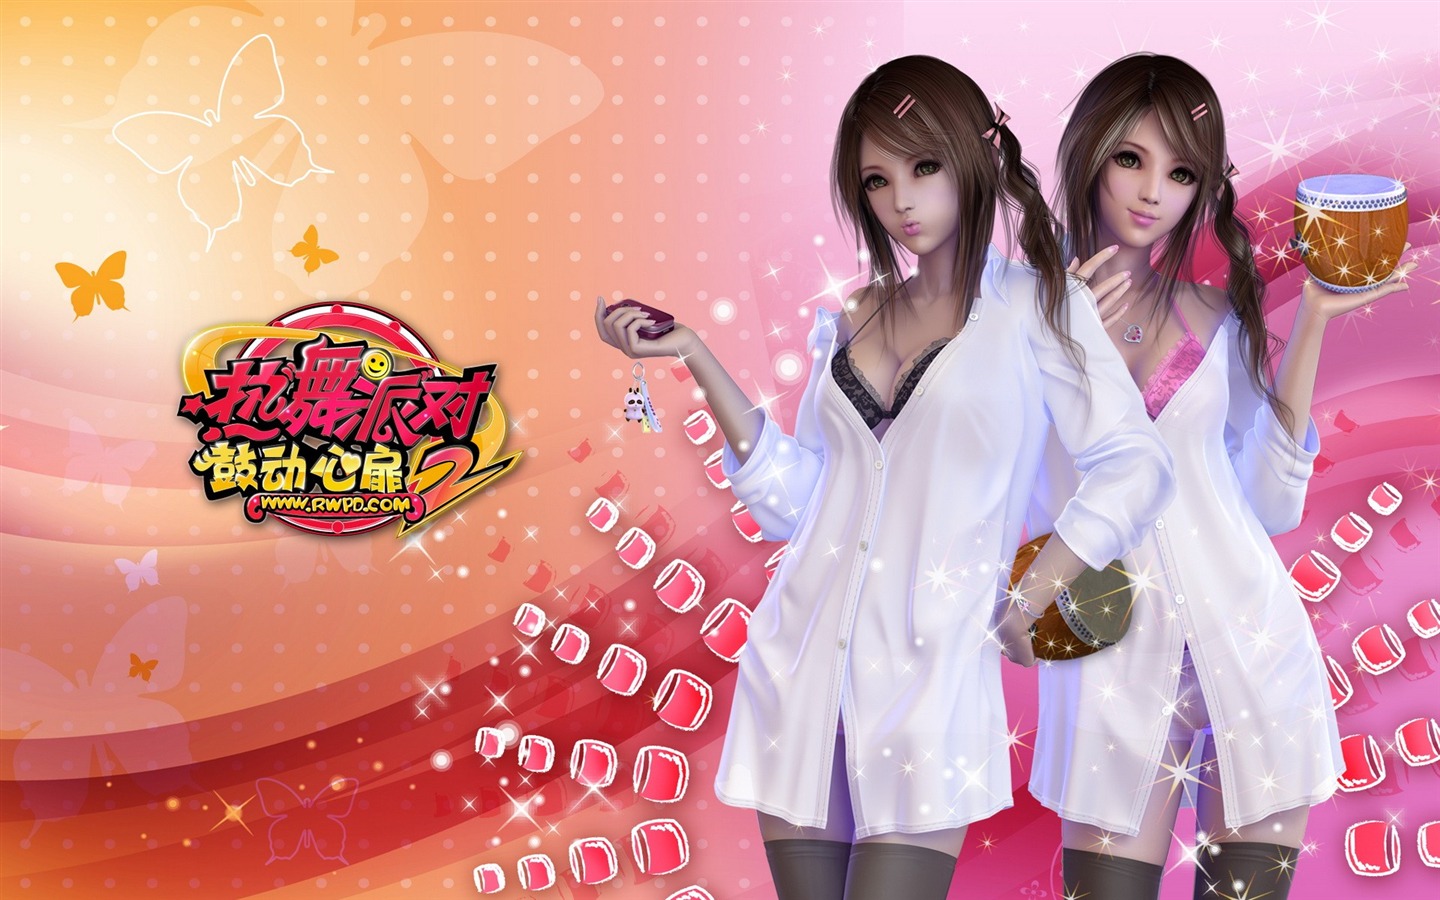 Online game Hot Dance Party II official wallpapers #12 - 1440x900